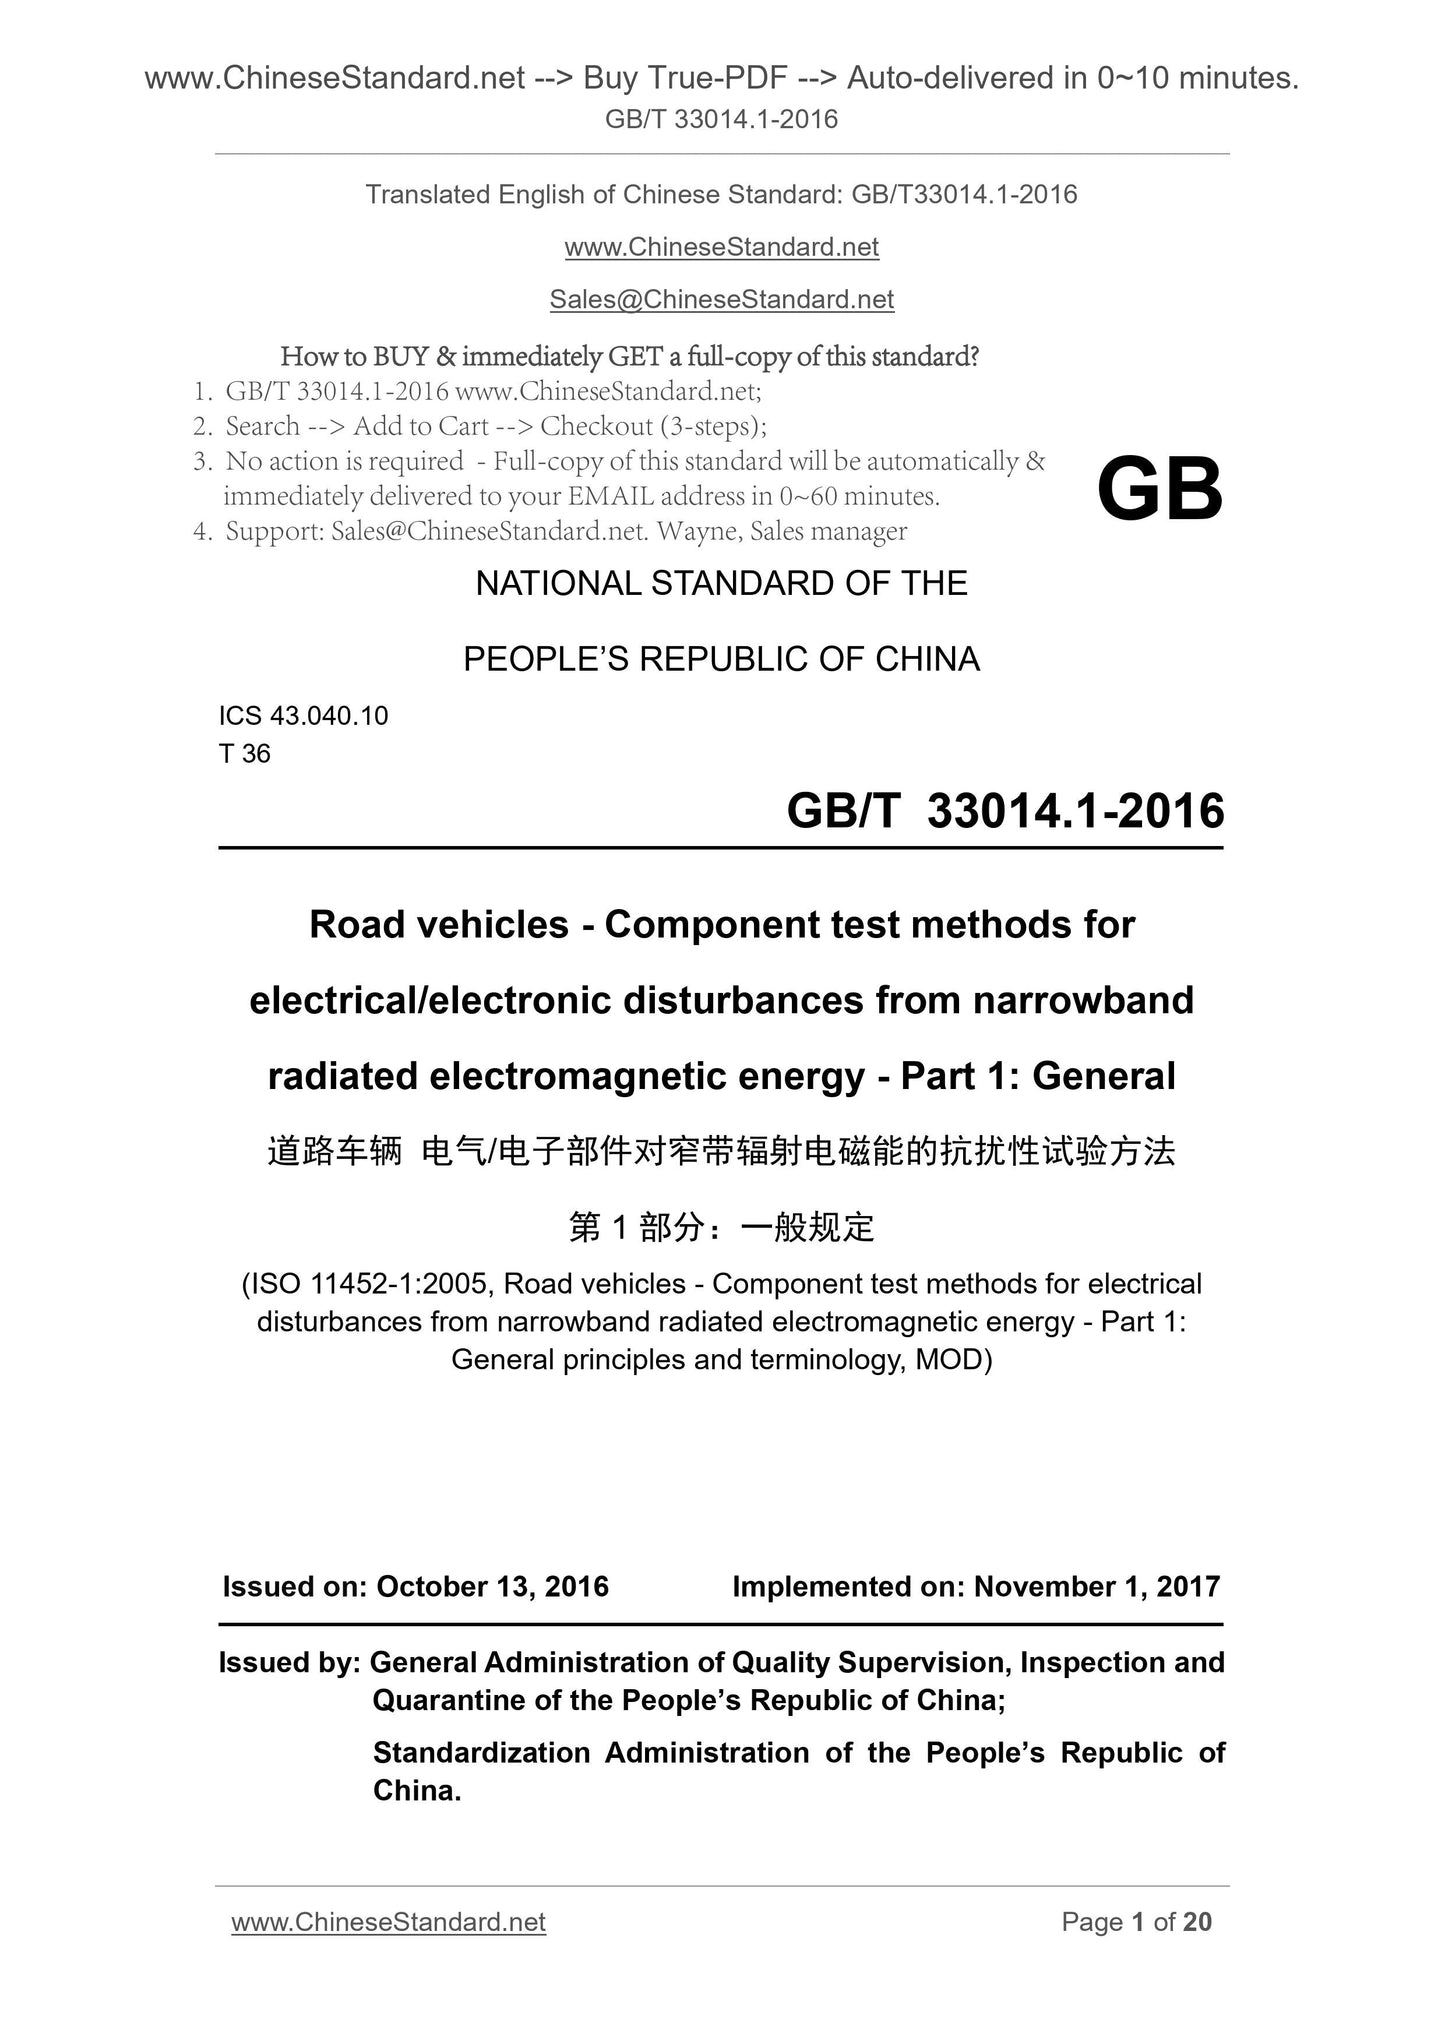 GB/T 33014.1-2016 Page 1